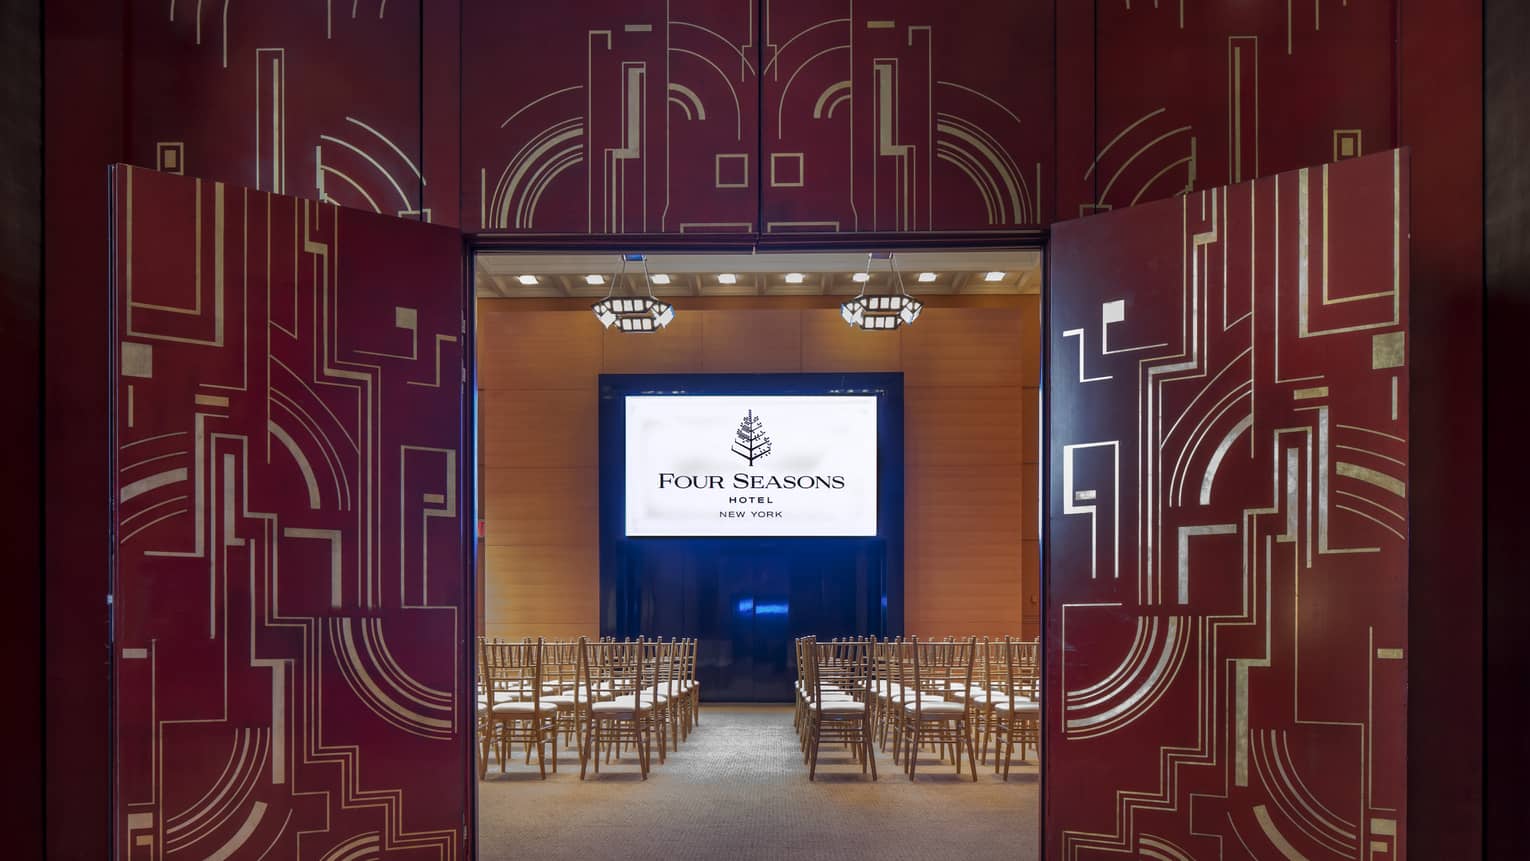 Two red and gold abstract and ornate doors are opened to reveal a board room with rows of chairs facing a screen with the Four Seasons logo on it 